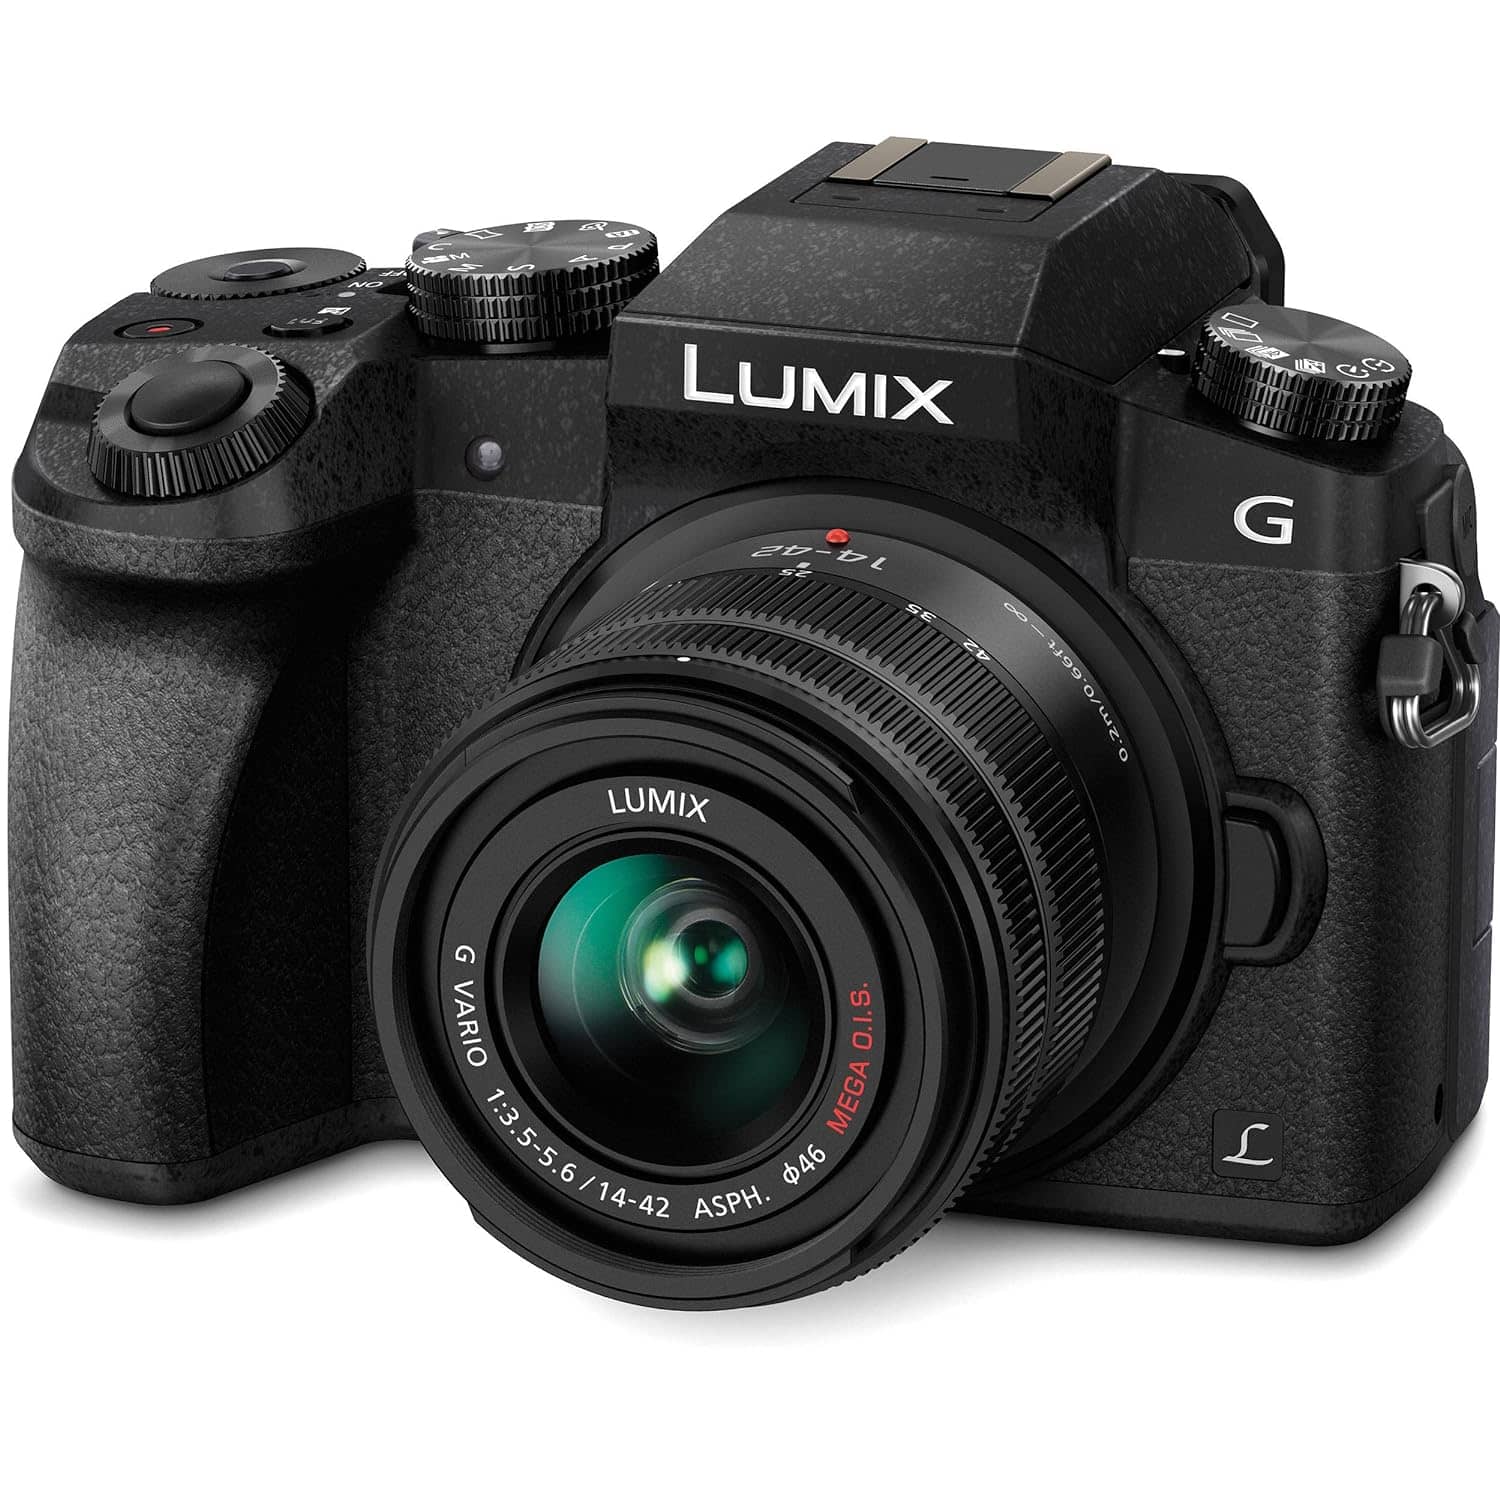 You are currently viewing Panasonic LUMIX G7 16.00 MP 4K Mirrorless Interchangeable Lens Camera Kit with 14-42 mm Lens (Black) with 3x Optical Zoom